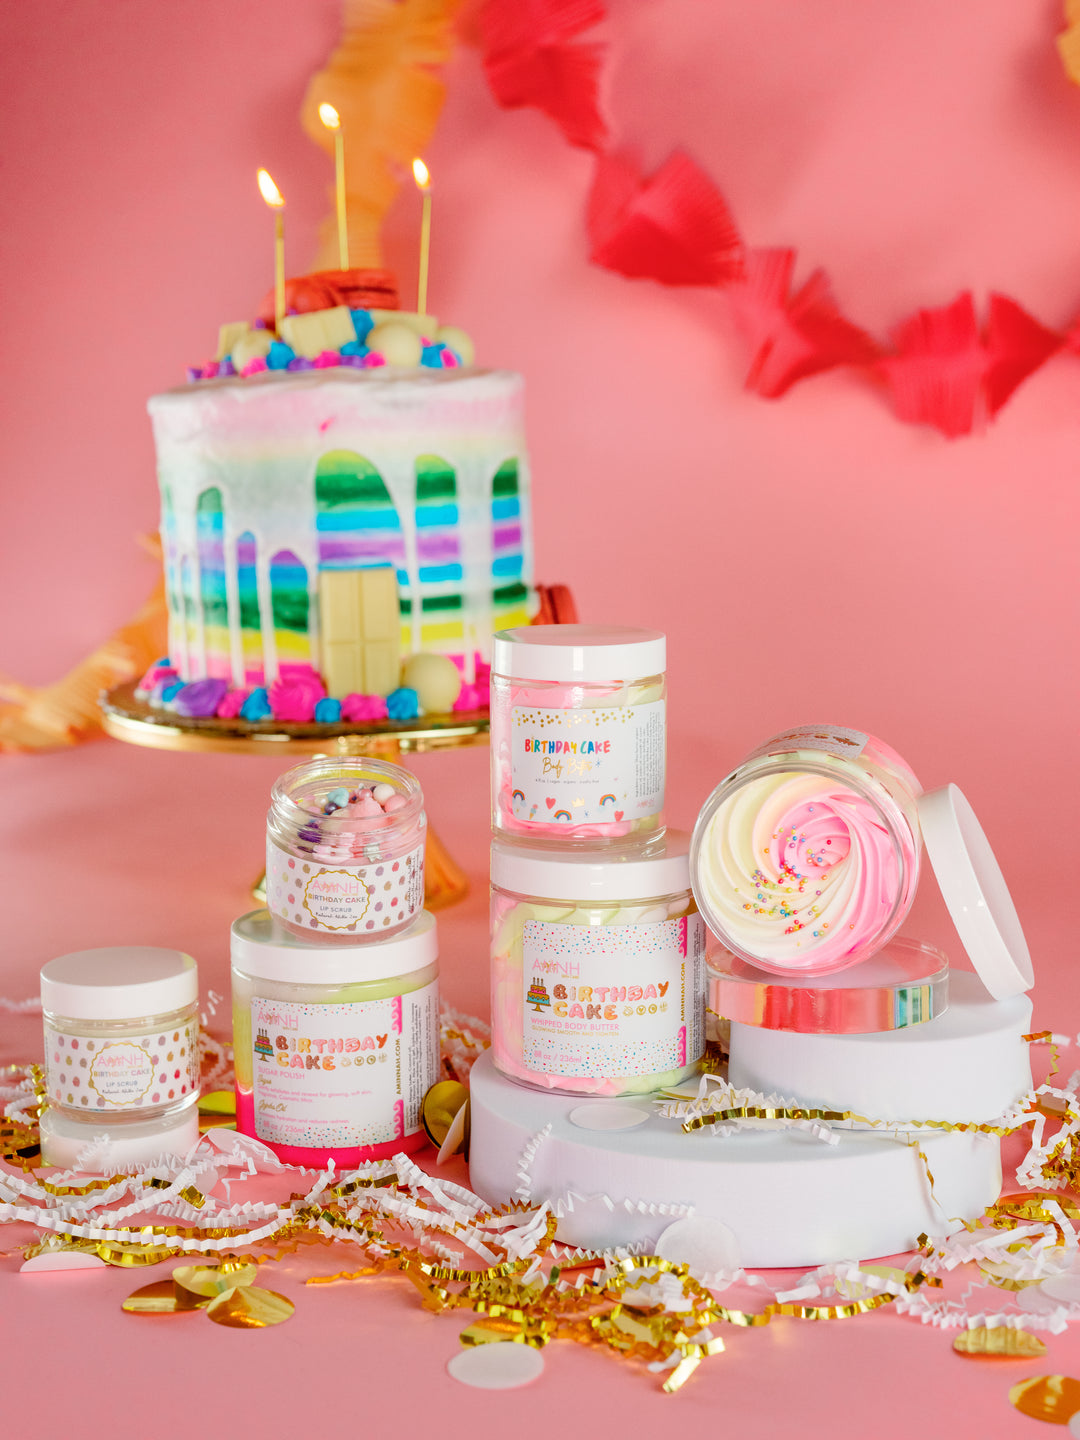 "Life of the Party" Birthday Cake Collection | Body Butter| Foaming Soap| Sugar Scrub|